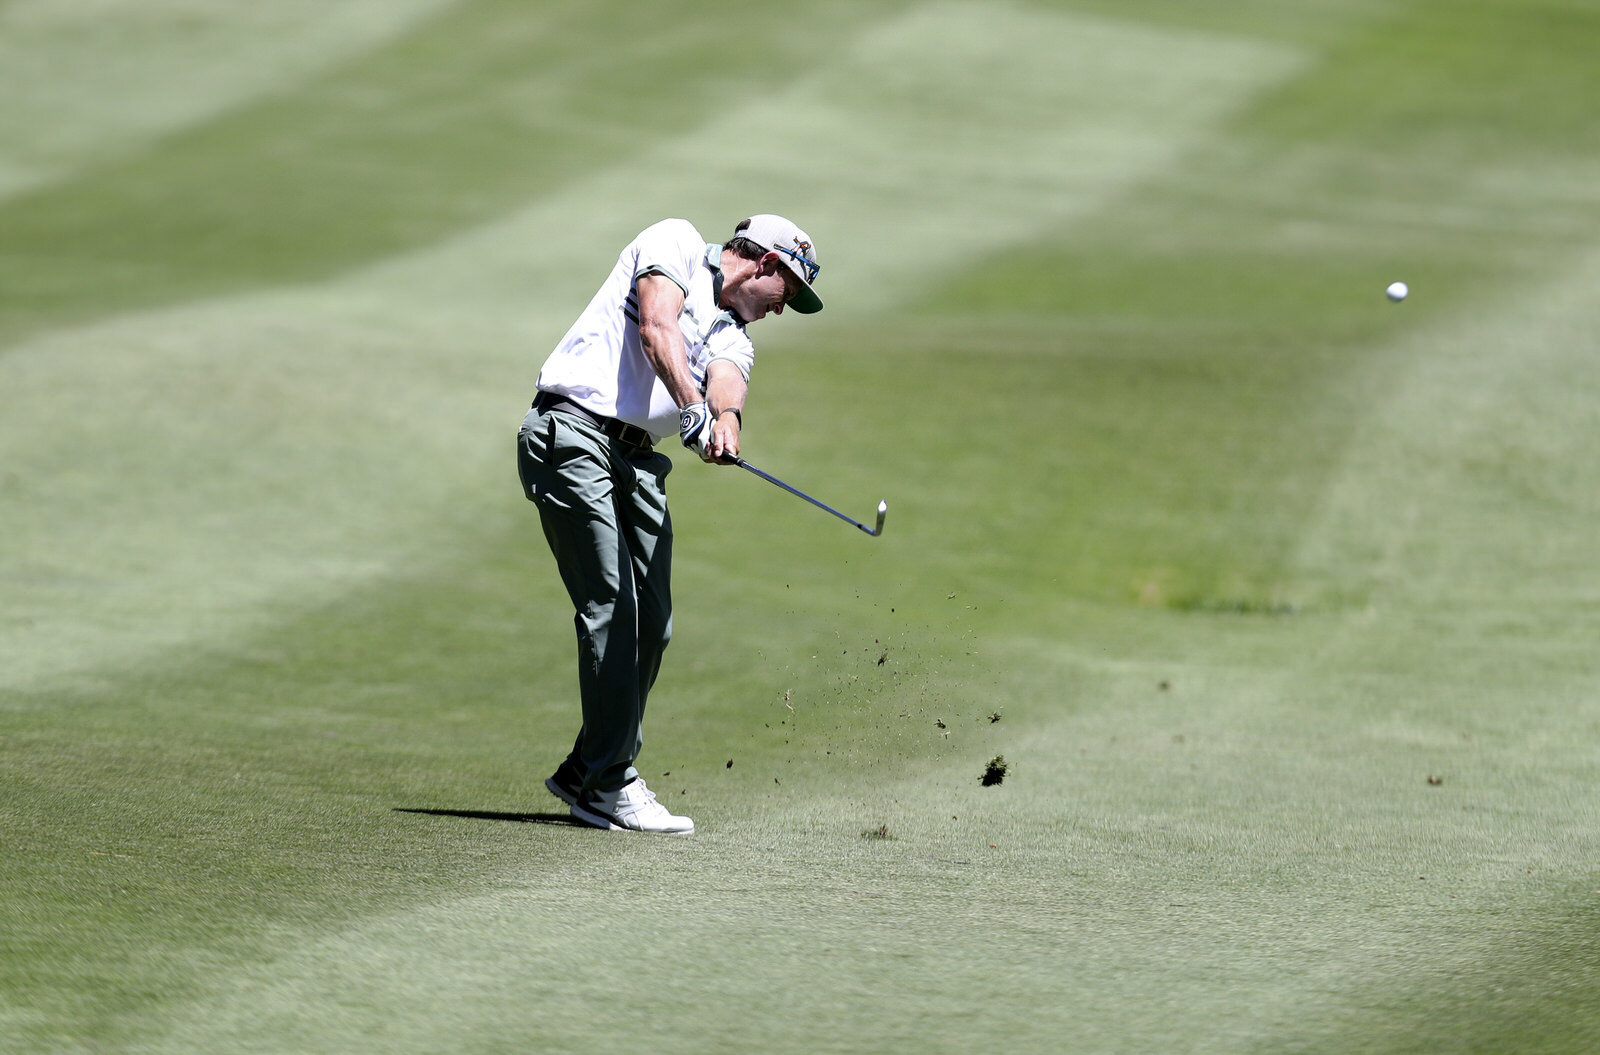  TRUCKEE, CALIFORNIA - AUGUST 01: Tim Wilkinson of New Zealand plays a shot on the fourth hole during the third round of the Barracuda Championship at Tahoe Mountain Club's Old Greenwood Golf Course on August 01, 2020 in Truckee, California. (Photo b